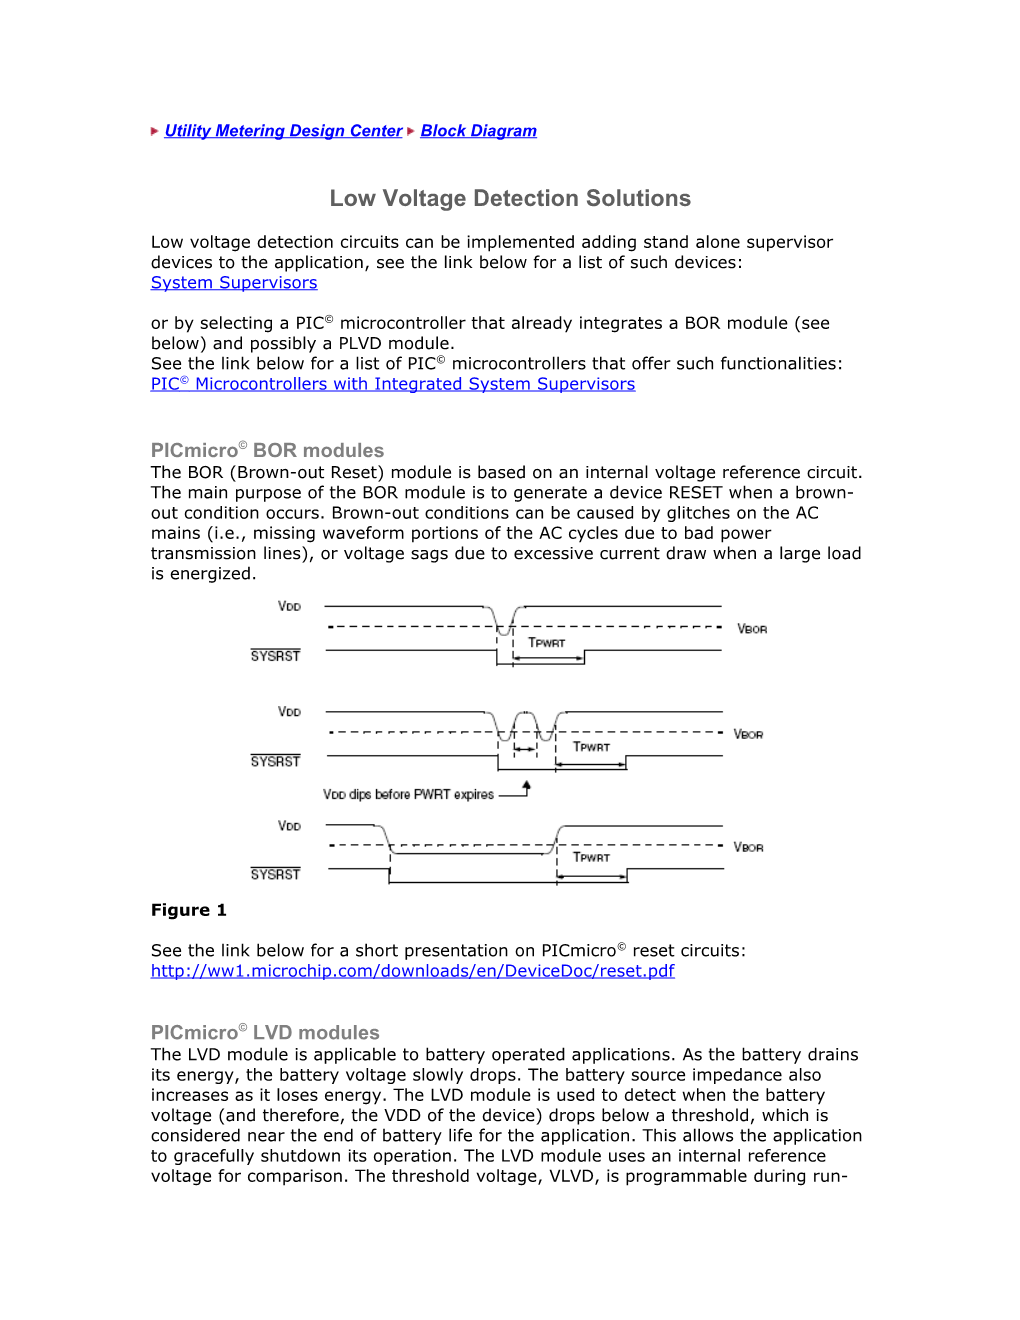 Low Voltage Detection Solutions